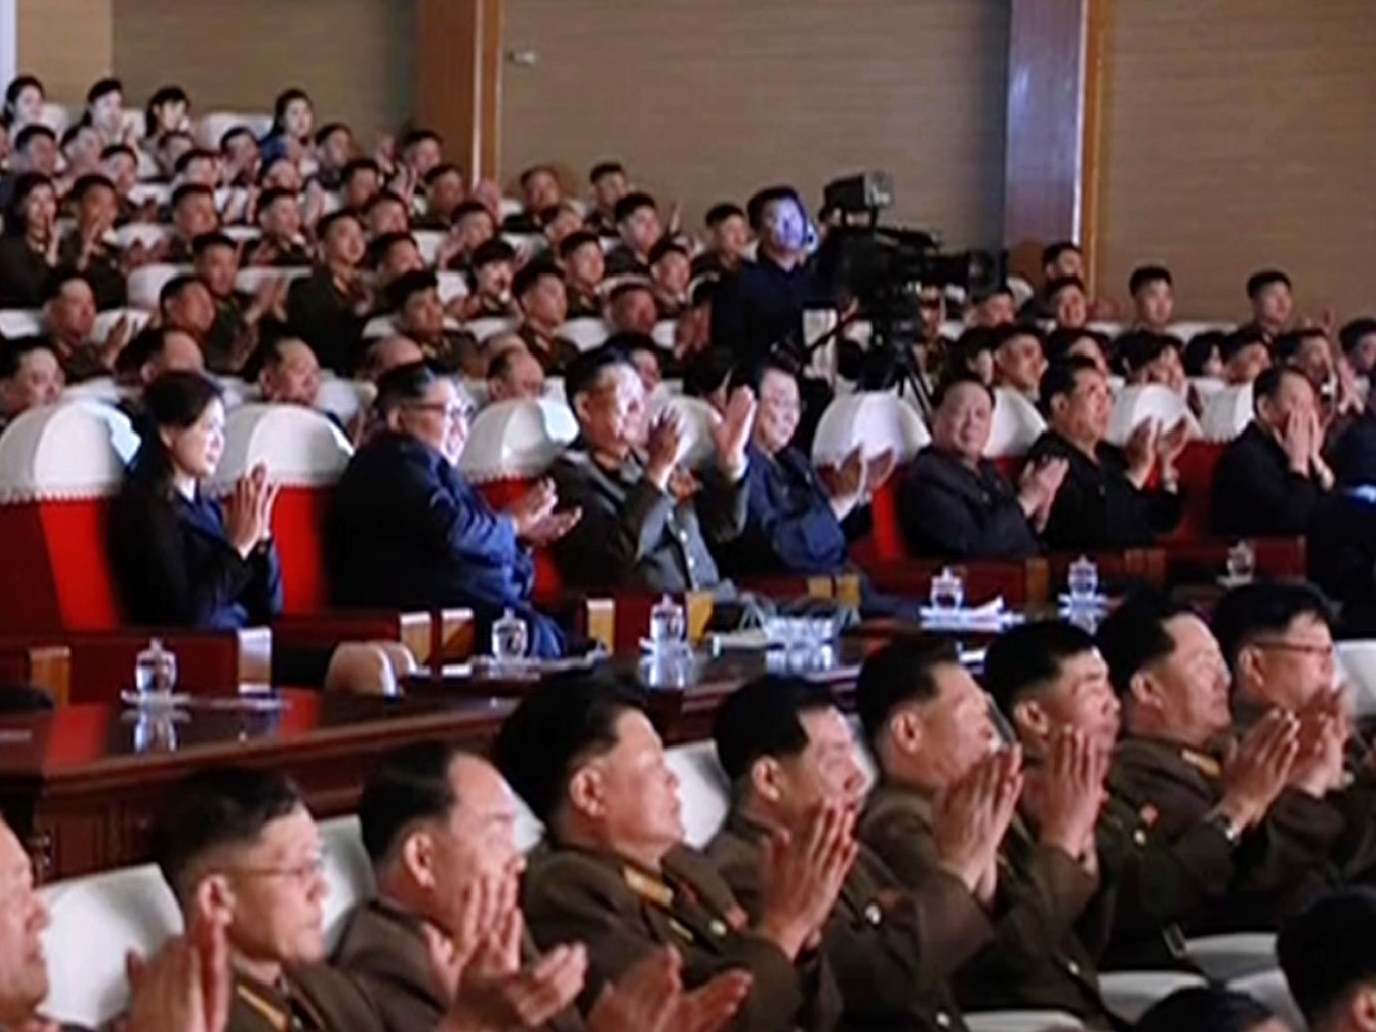 Kim Yong-chol can be seen sitting on the far right, with his hands partially covering his face